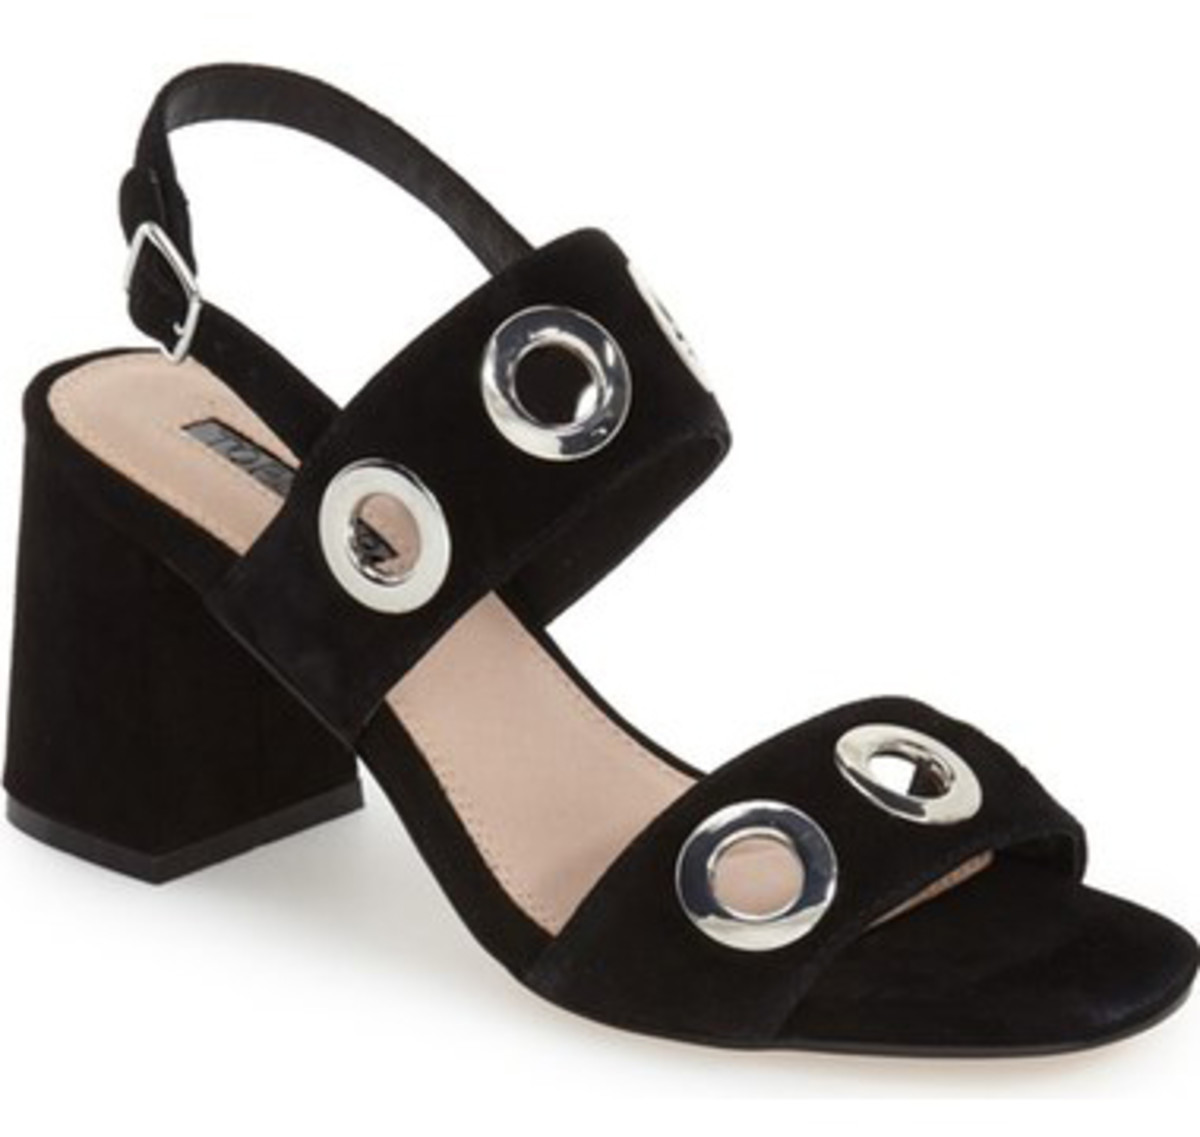 Topshop 'Round' Eyelet Slingback Sandal, $40 (was $85), available at norstrom.com.